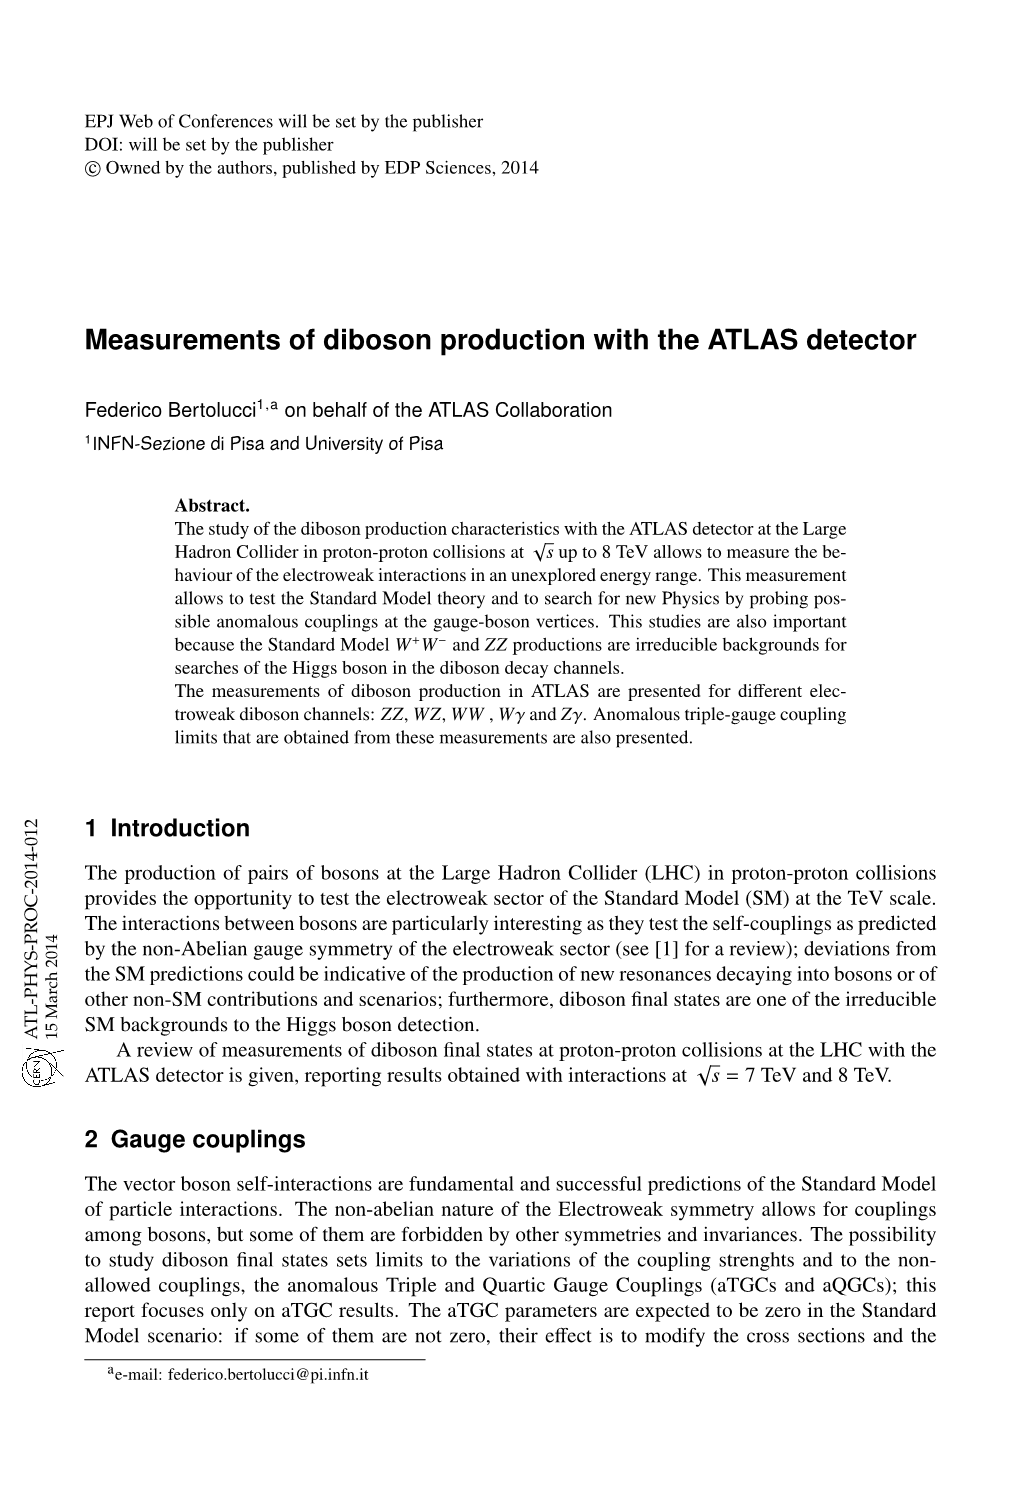 Measurements of Diboson Production with the ATLAS Detector